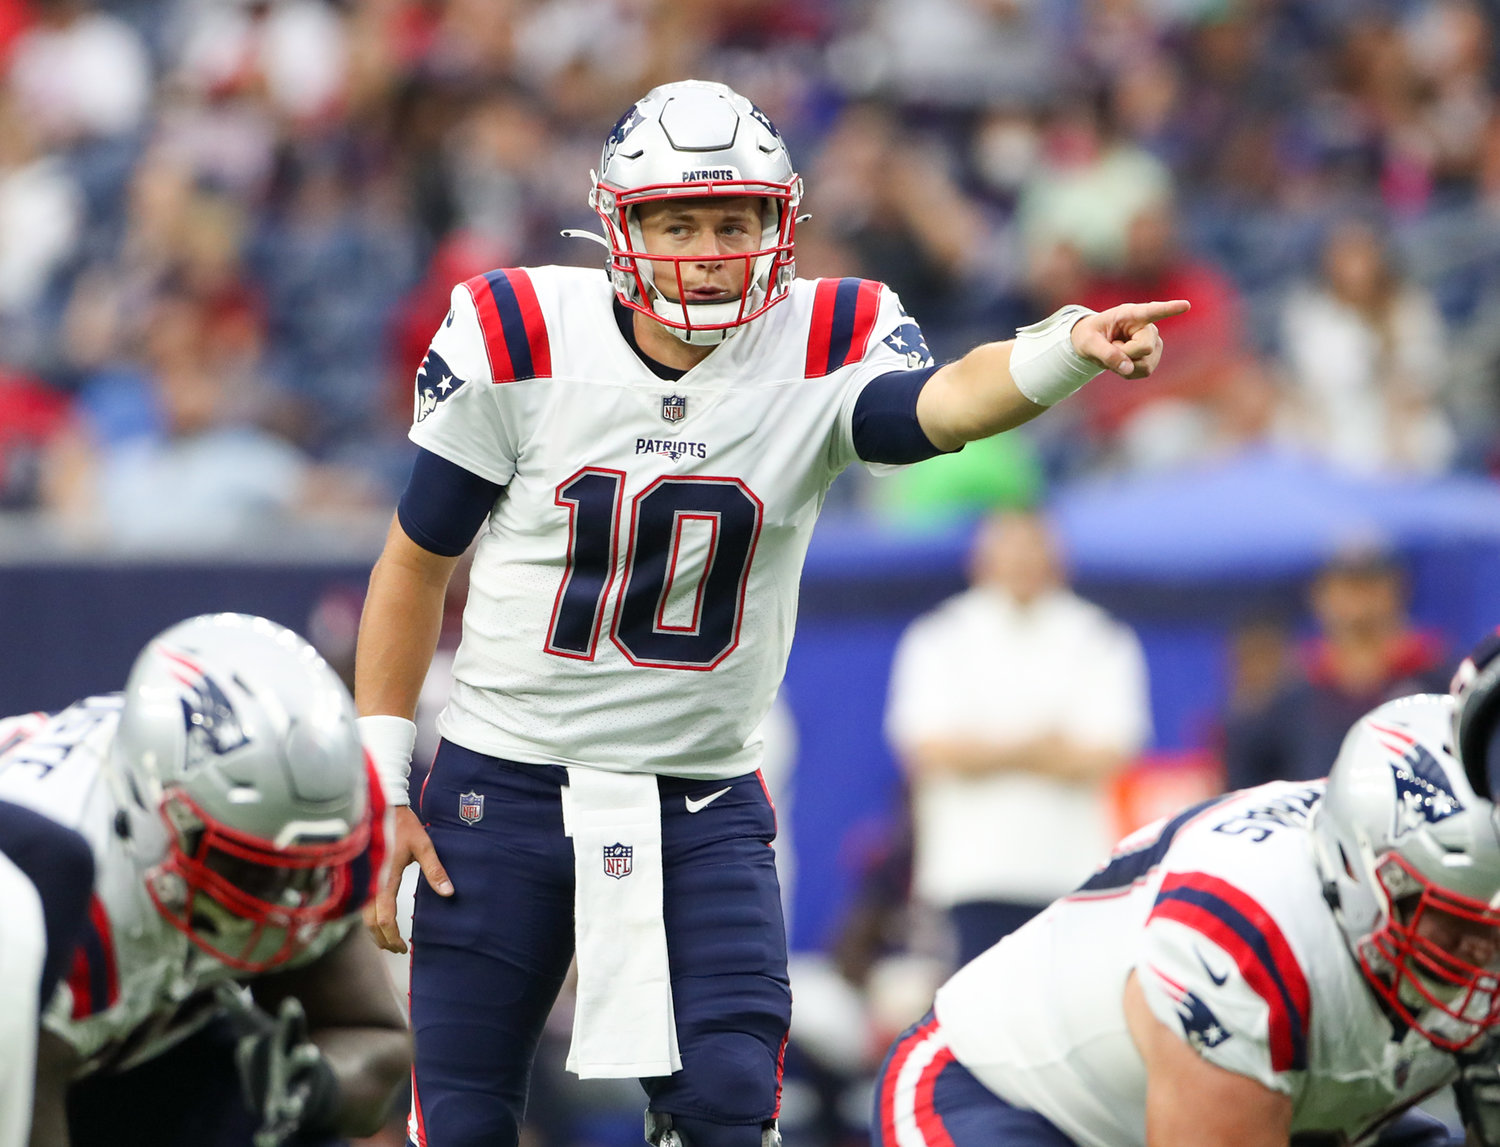 New England Patriots quarterback Mac Jones (10) calls out the defense before a snap during an NFL game between Houston and New England on October 10, 2021 in Houston, Texas. The Patriots won 25-22.